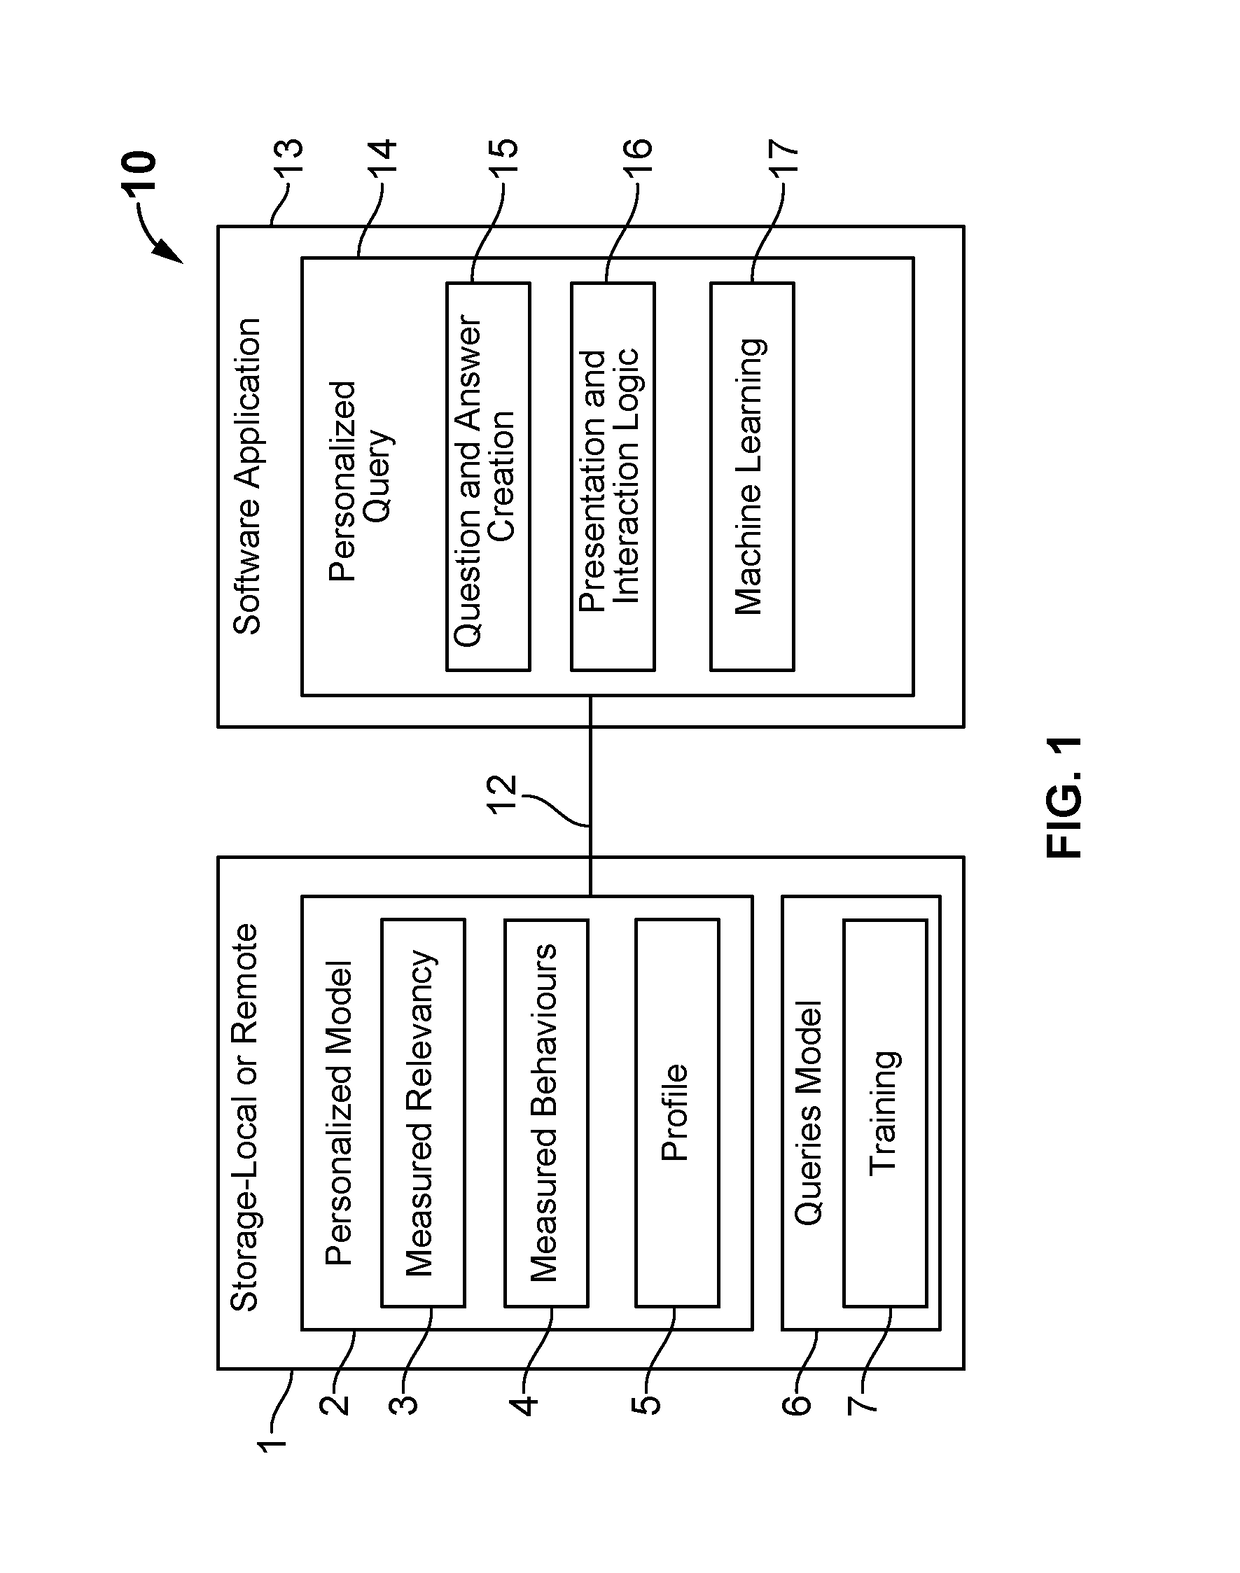 Adaptive network querying system